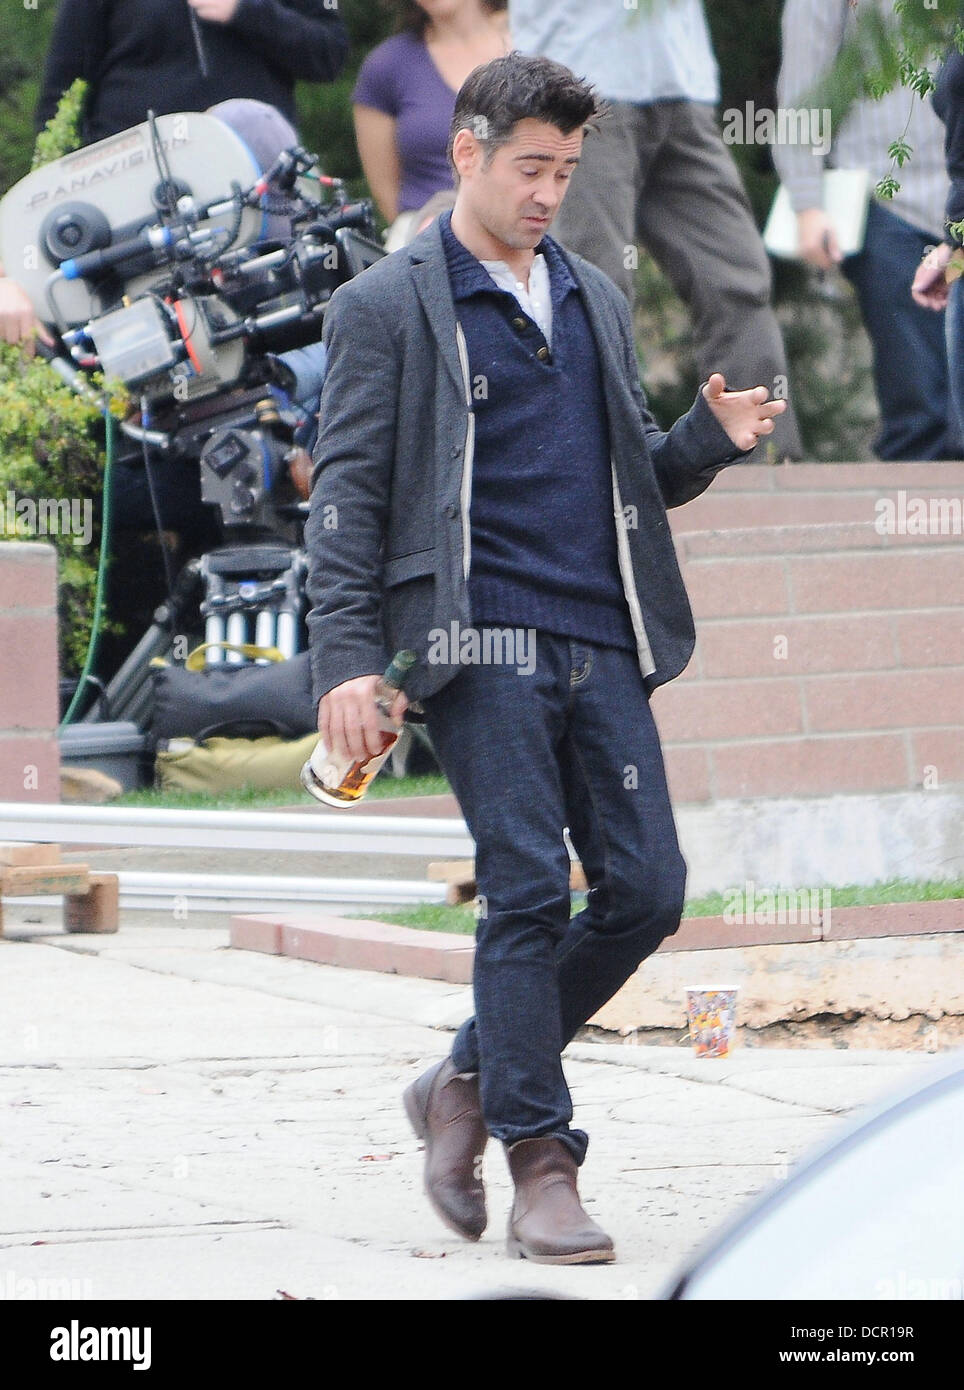 Irish actor, Colin Farrell looks inebriated as he drinks from a bottle of Buffalo Trace Kentucky Straight Bourbon Whiskey, as he films a scene of new movie 'Seven Psychopaths', a film about a man who gets involved in a friend's dog-napping plot. Los Angel Stock Photo